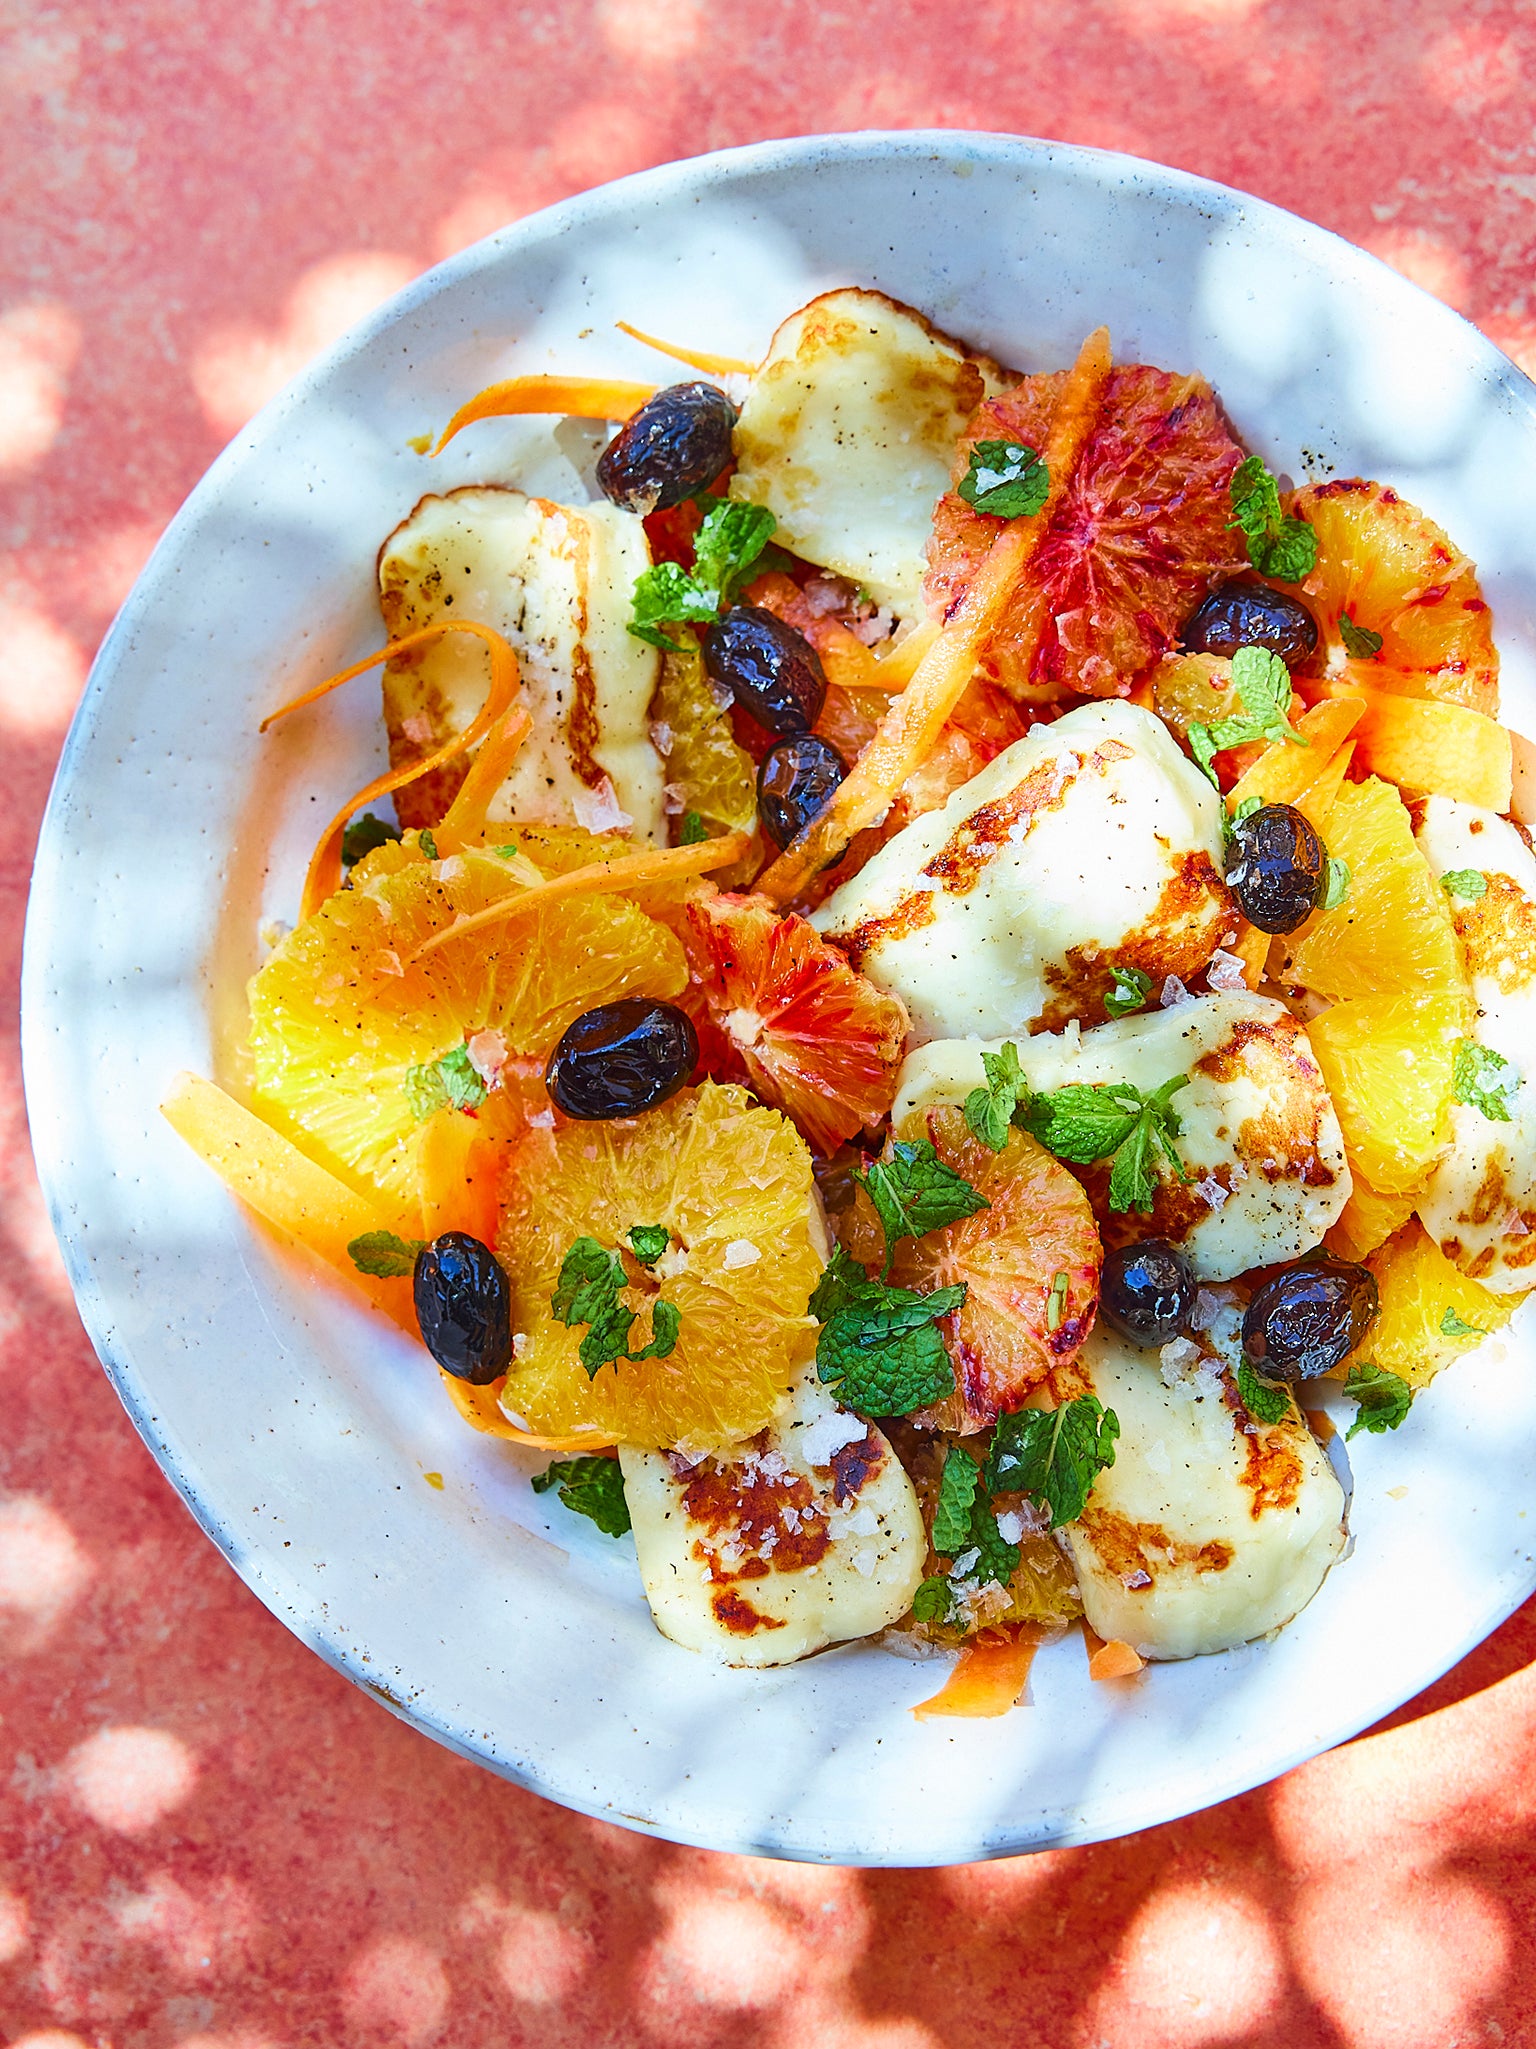 A salad that encapsulates the flavours of summer